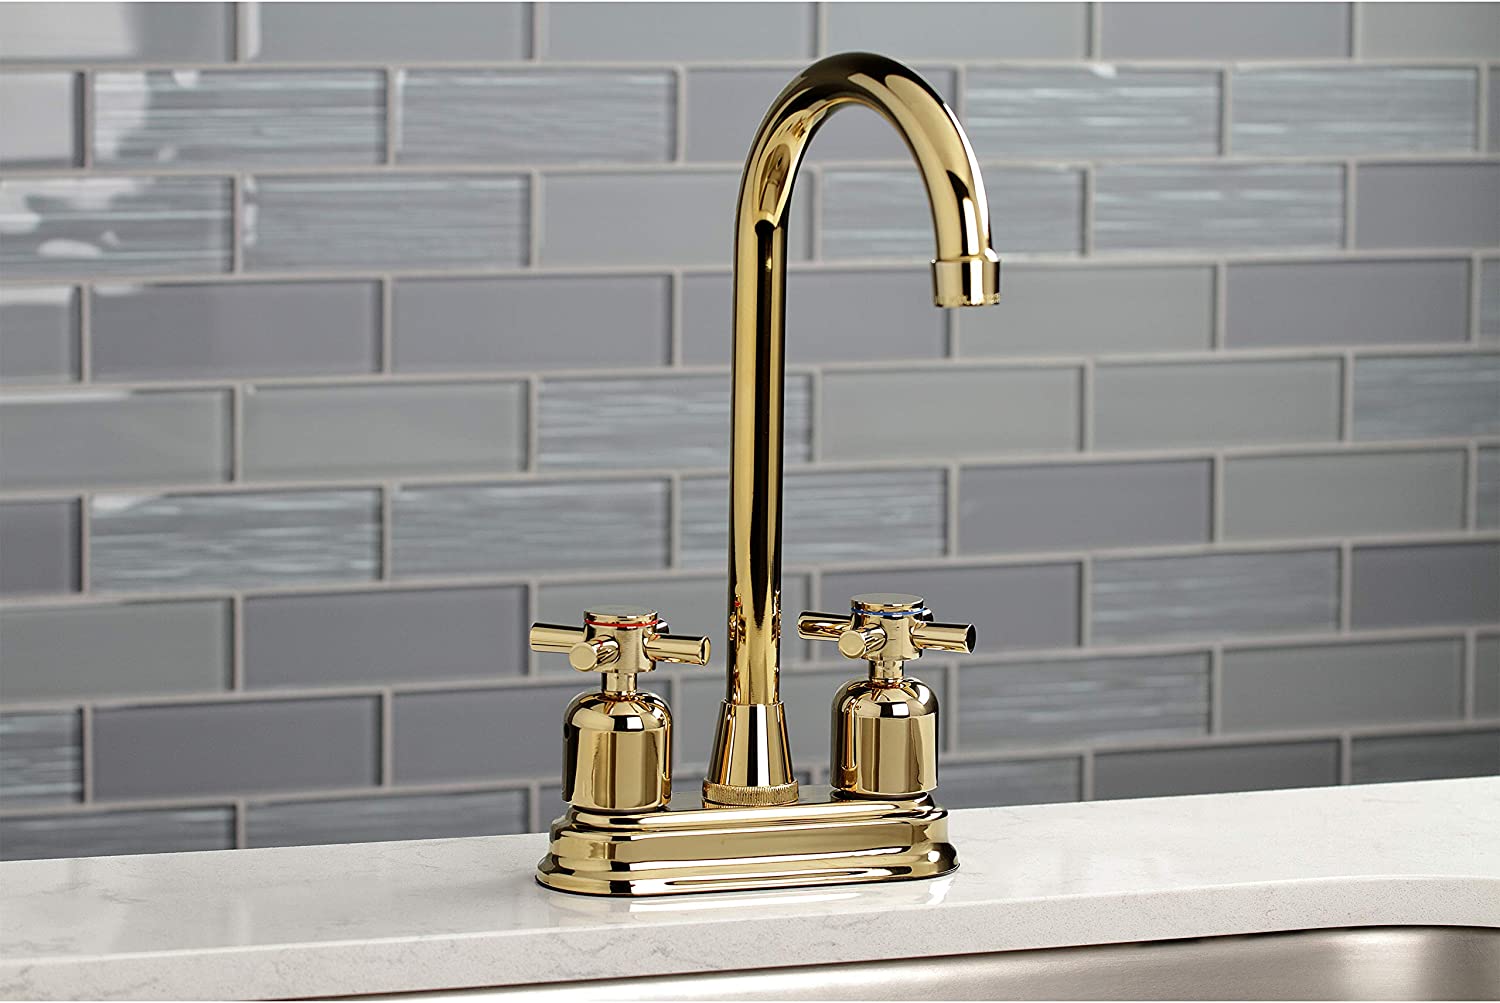 Kingston Brass KB8492DX Concord Bar Faucet, Polished Brass